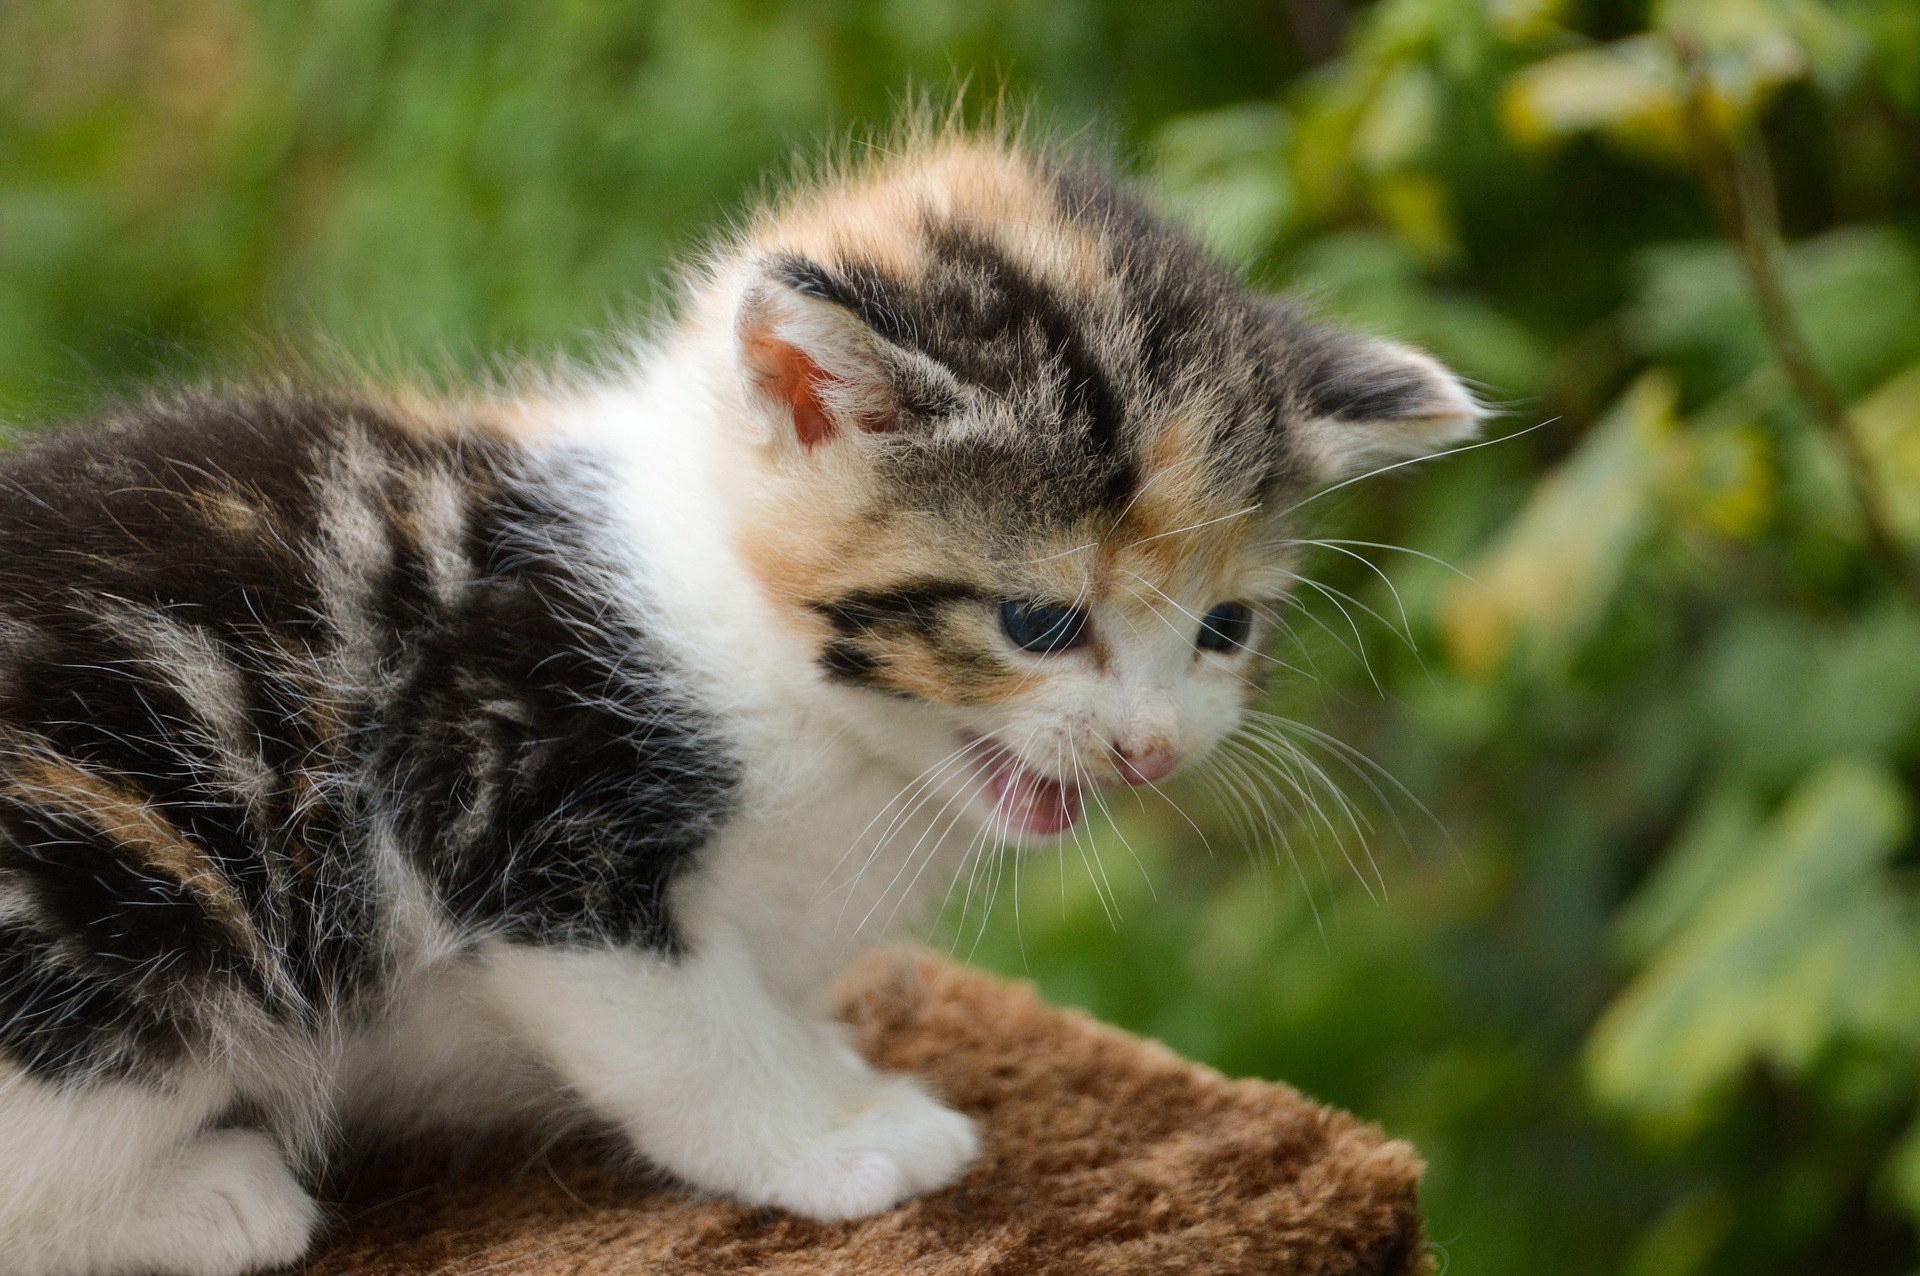 Young kitten on a log chirping